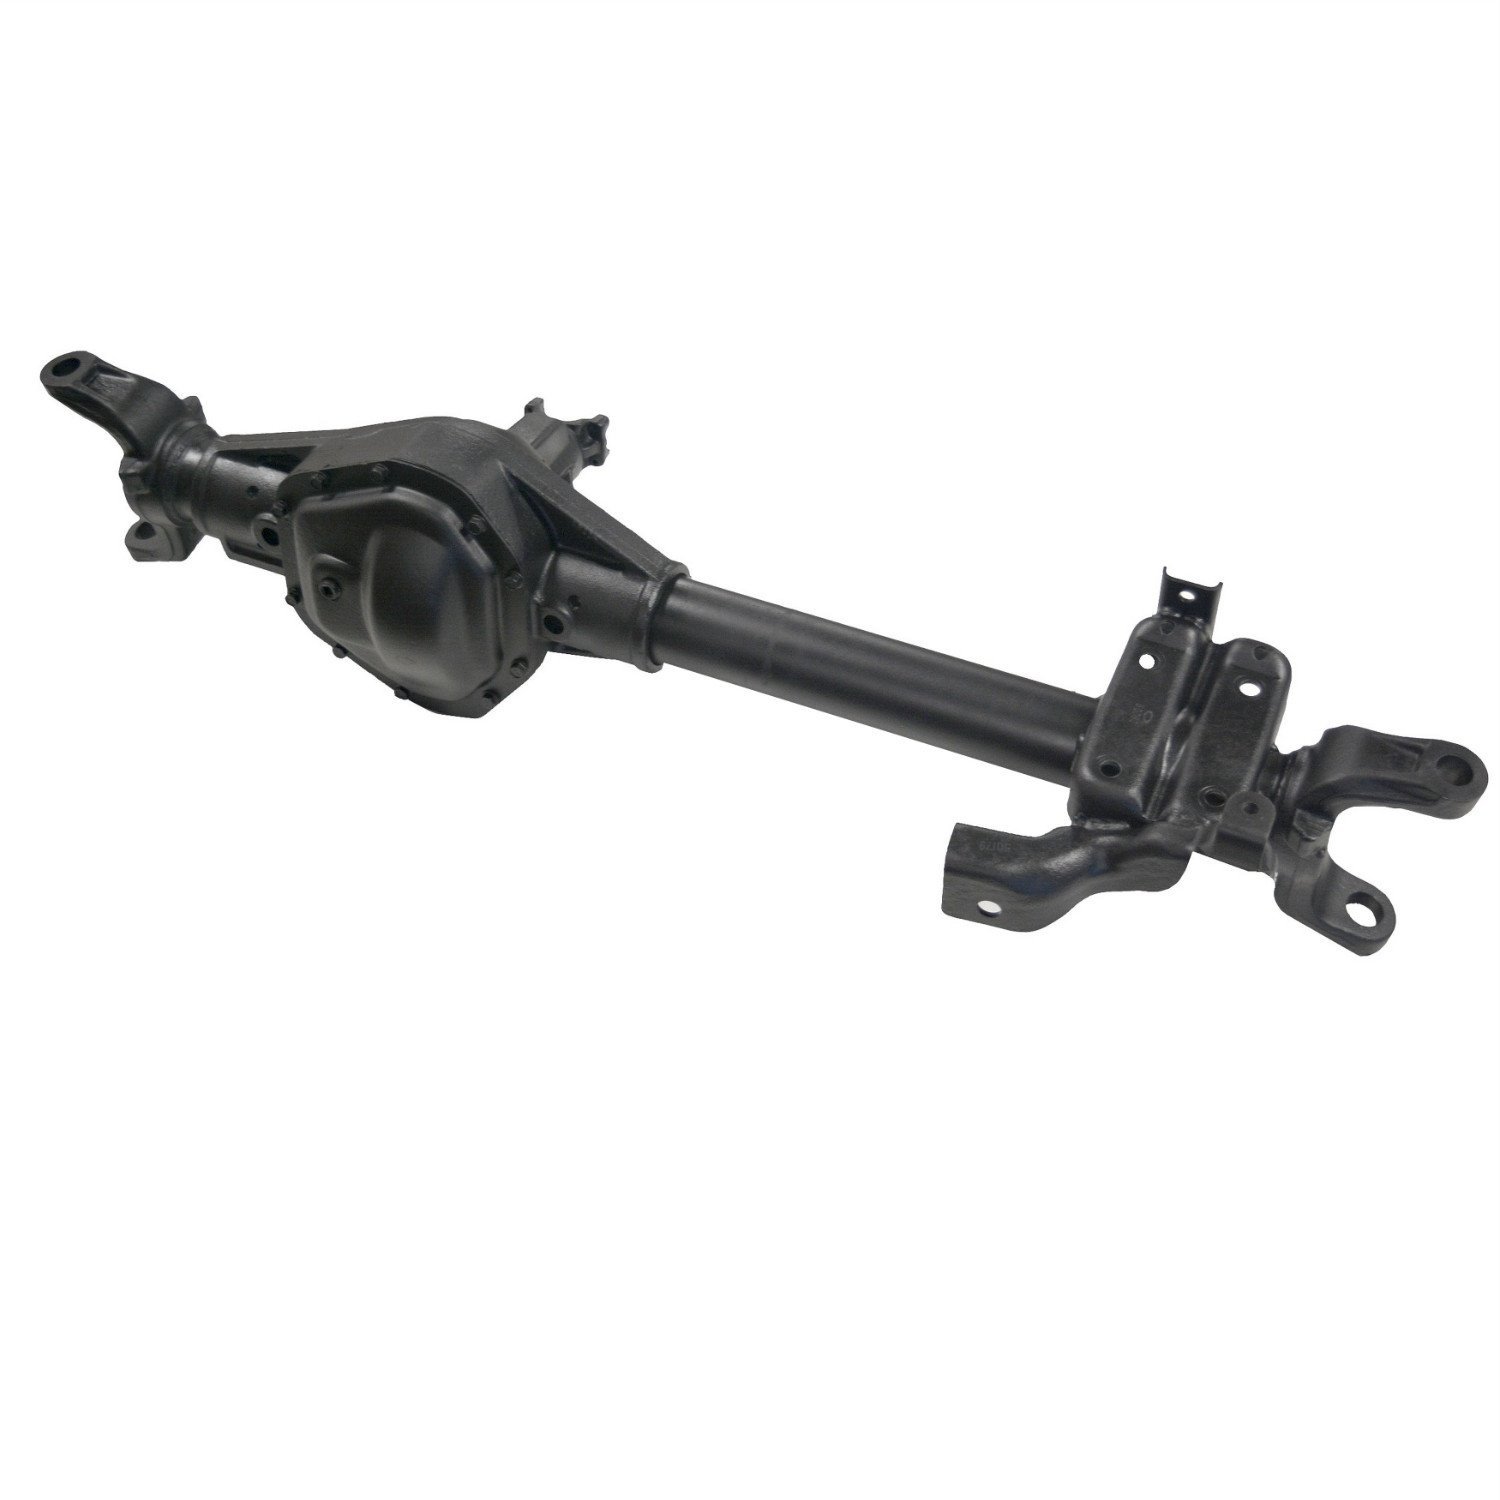 Remanufactured Complete Axle Assembly for Dana 50 1999 F250 & F350 4.30, SRW, 4 Wheel ABS